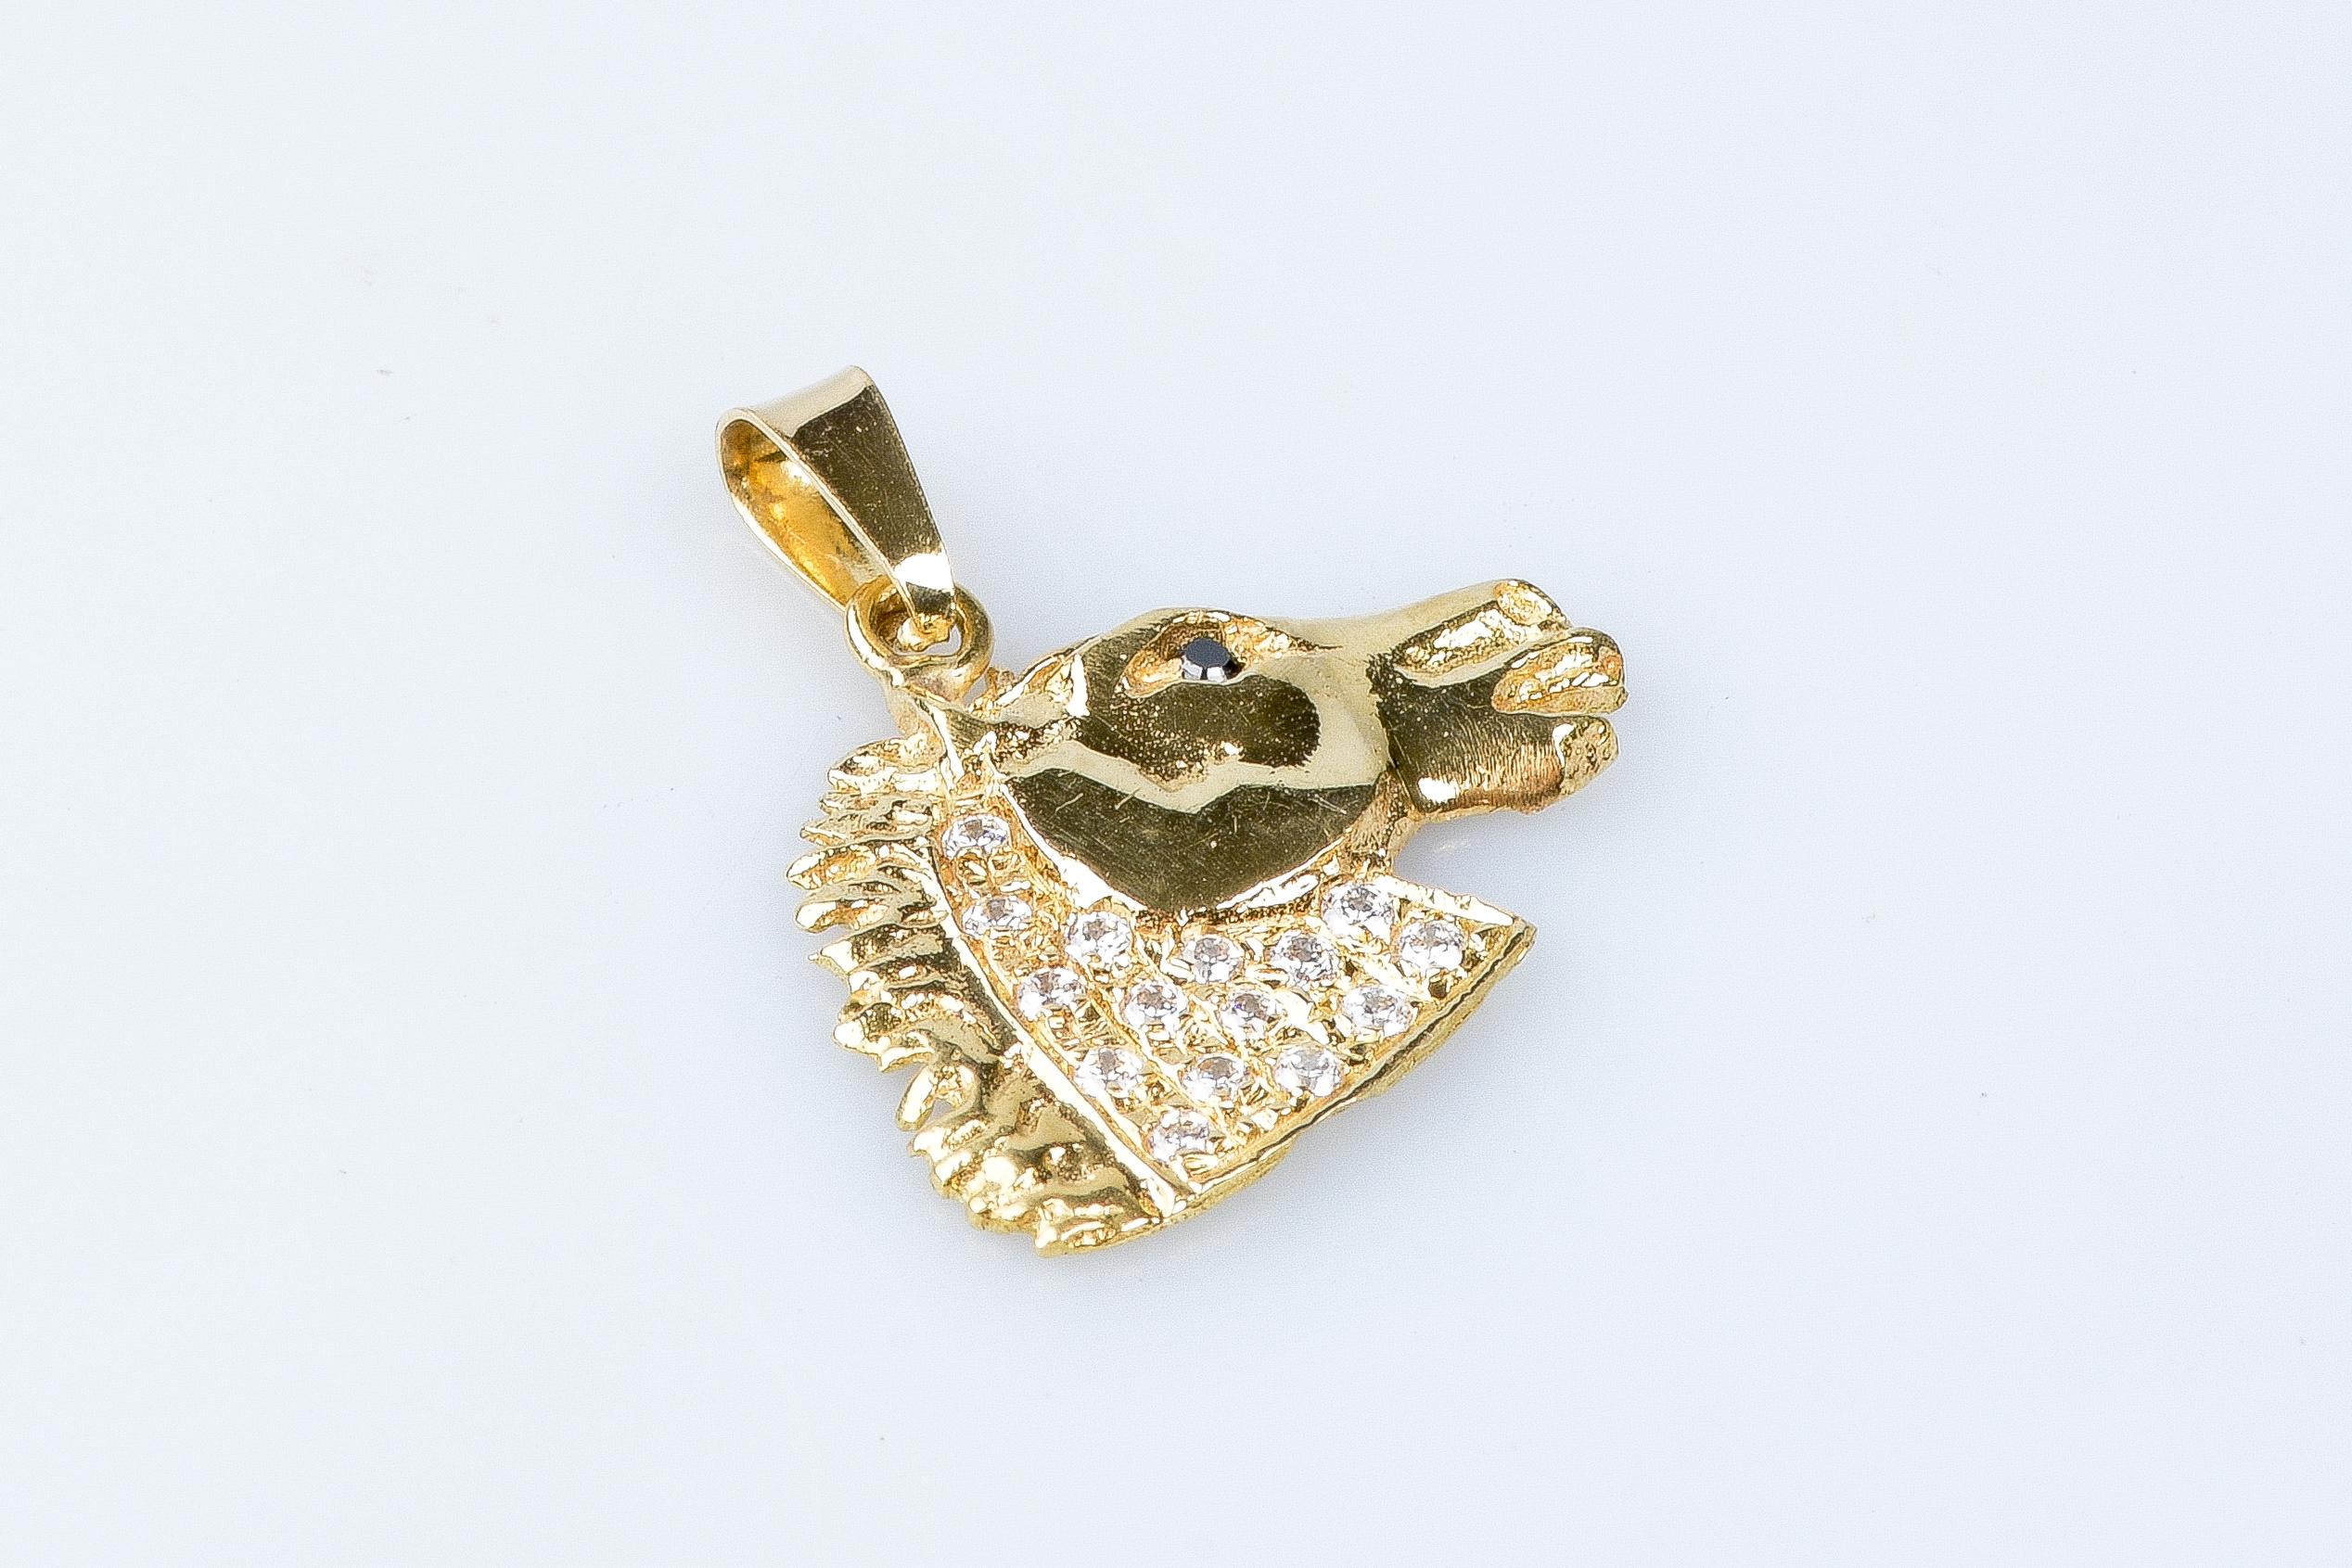 18 carat yellow gold horse pendant designed with zirconium oxides.

 Weight : 2.50 gr. 

Dimensions : 2.20 x 2.00 x 0.12 cm

Jewel delivered in a luxurious box with a certificate of authenticity Monte-Carlo Bijoux. 

Condition : Like new

18 carat